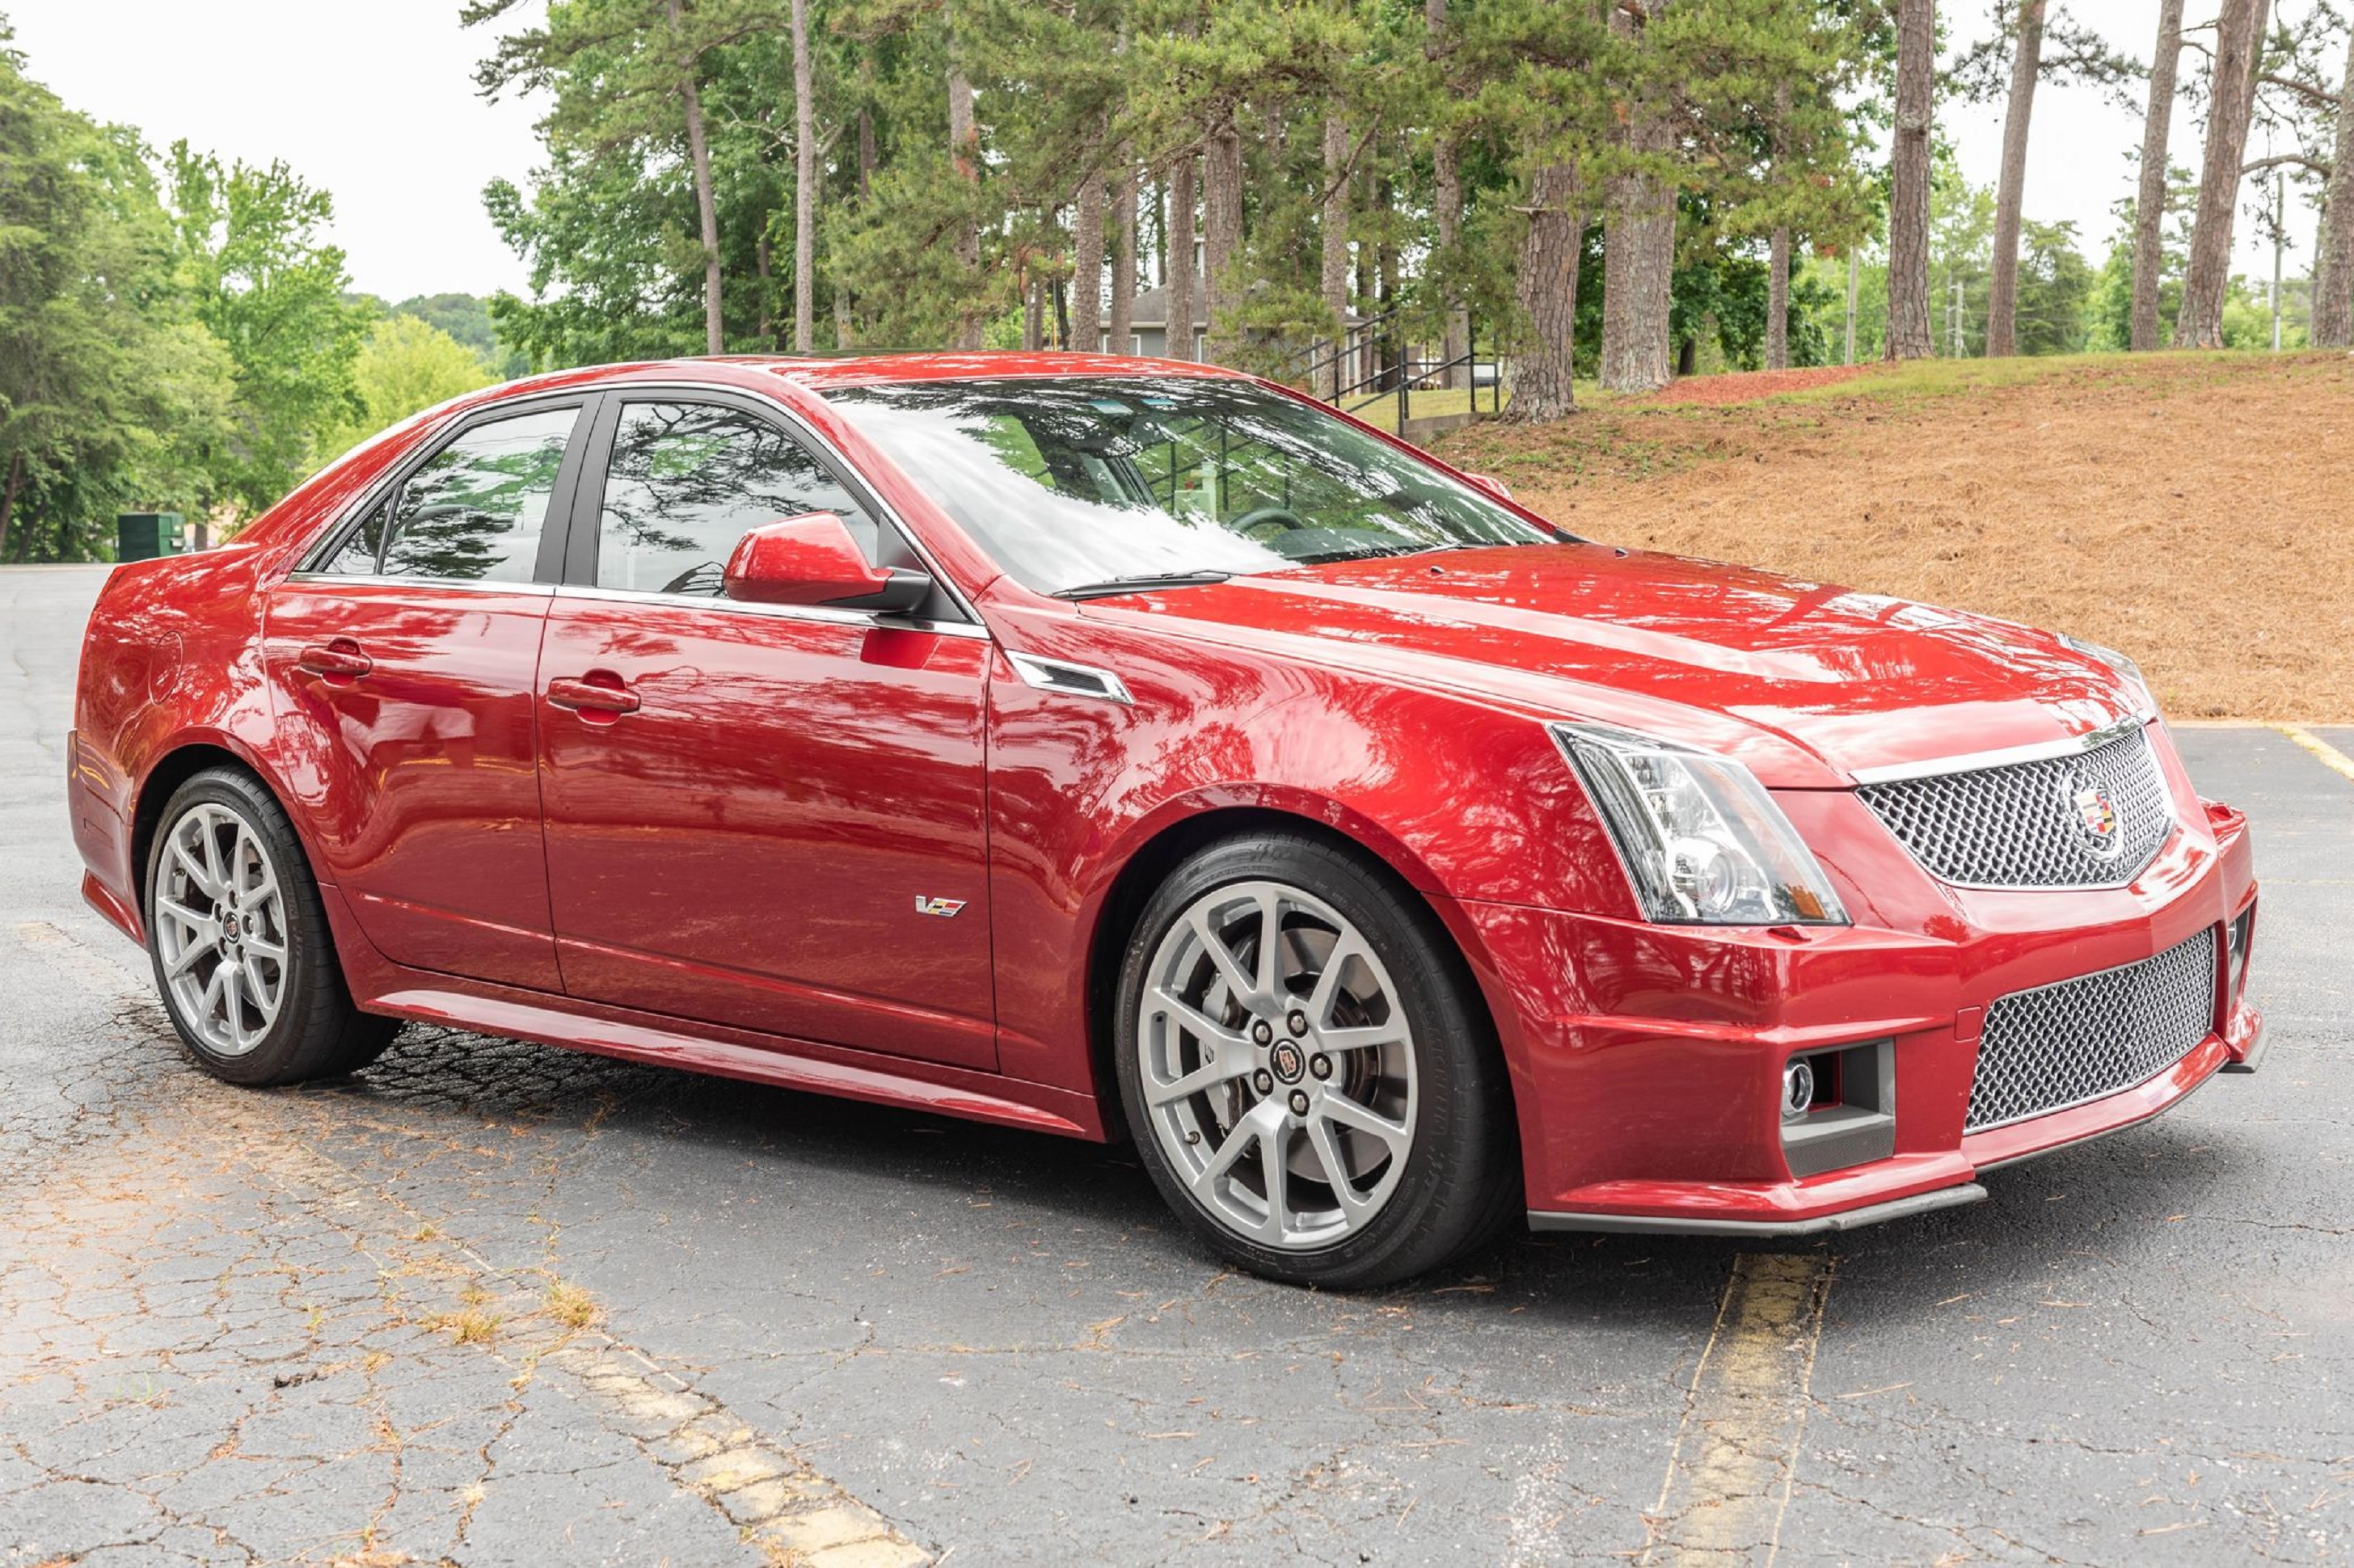 A red 2011 Cadillac CTS-V Sedan in a parking lot in the woods